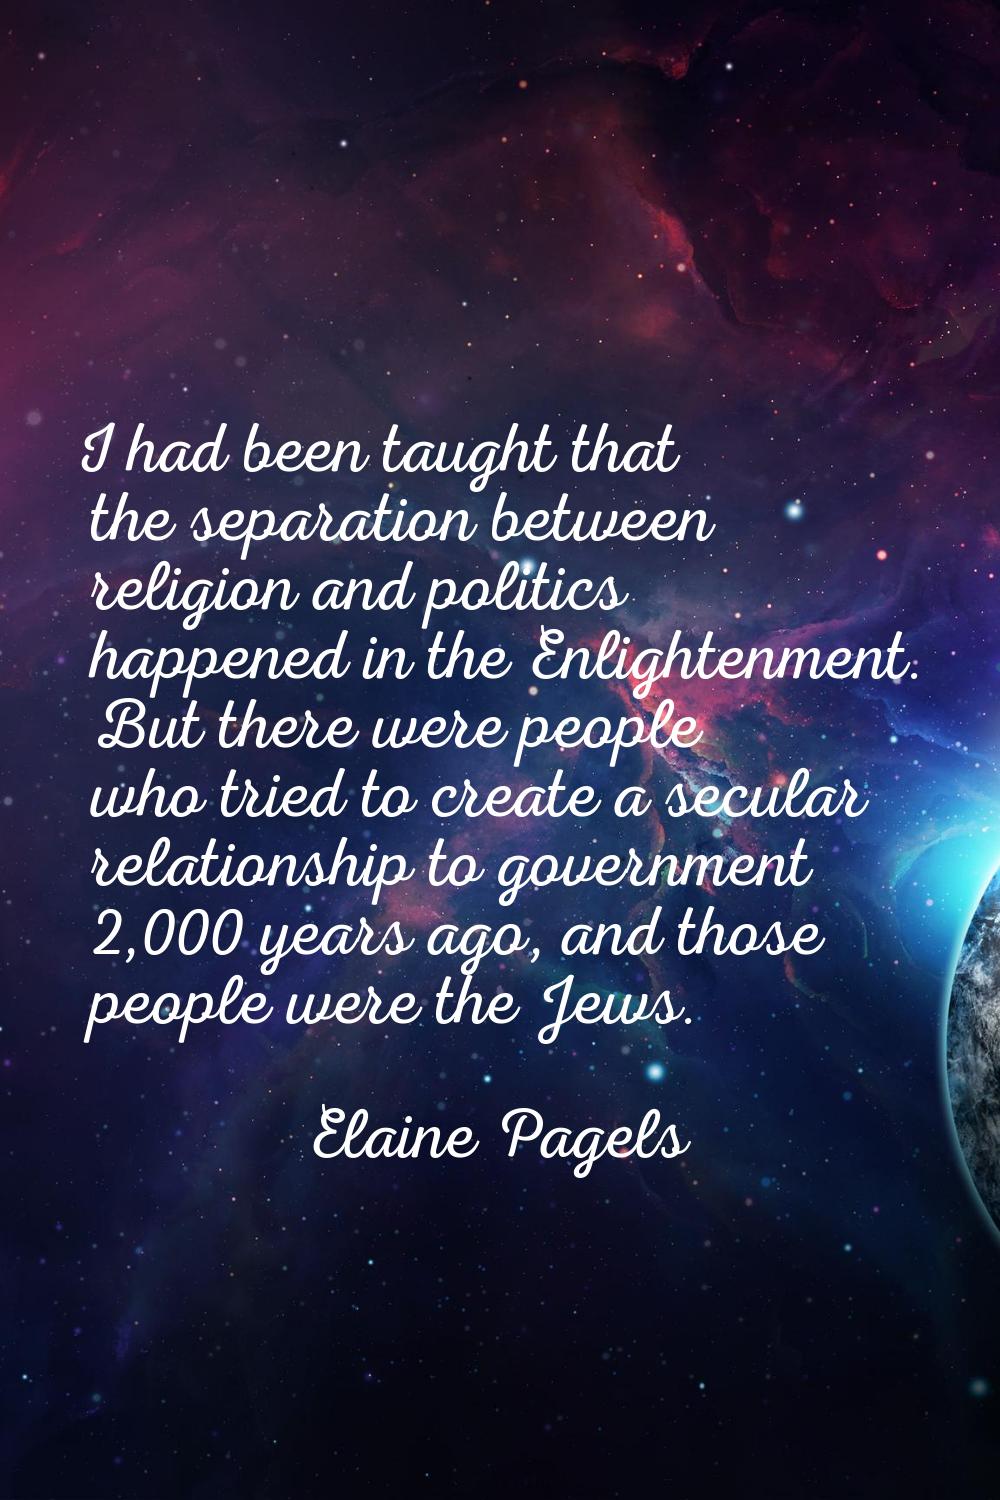 I had been taught that the separation between religion and politics happened in the Enlightenment. 